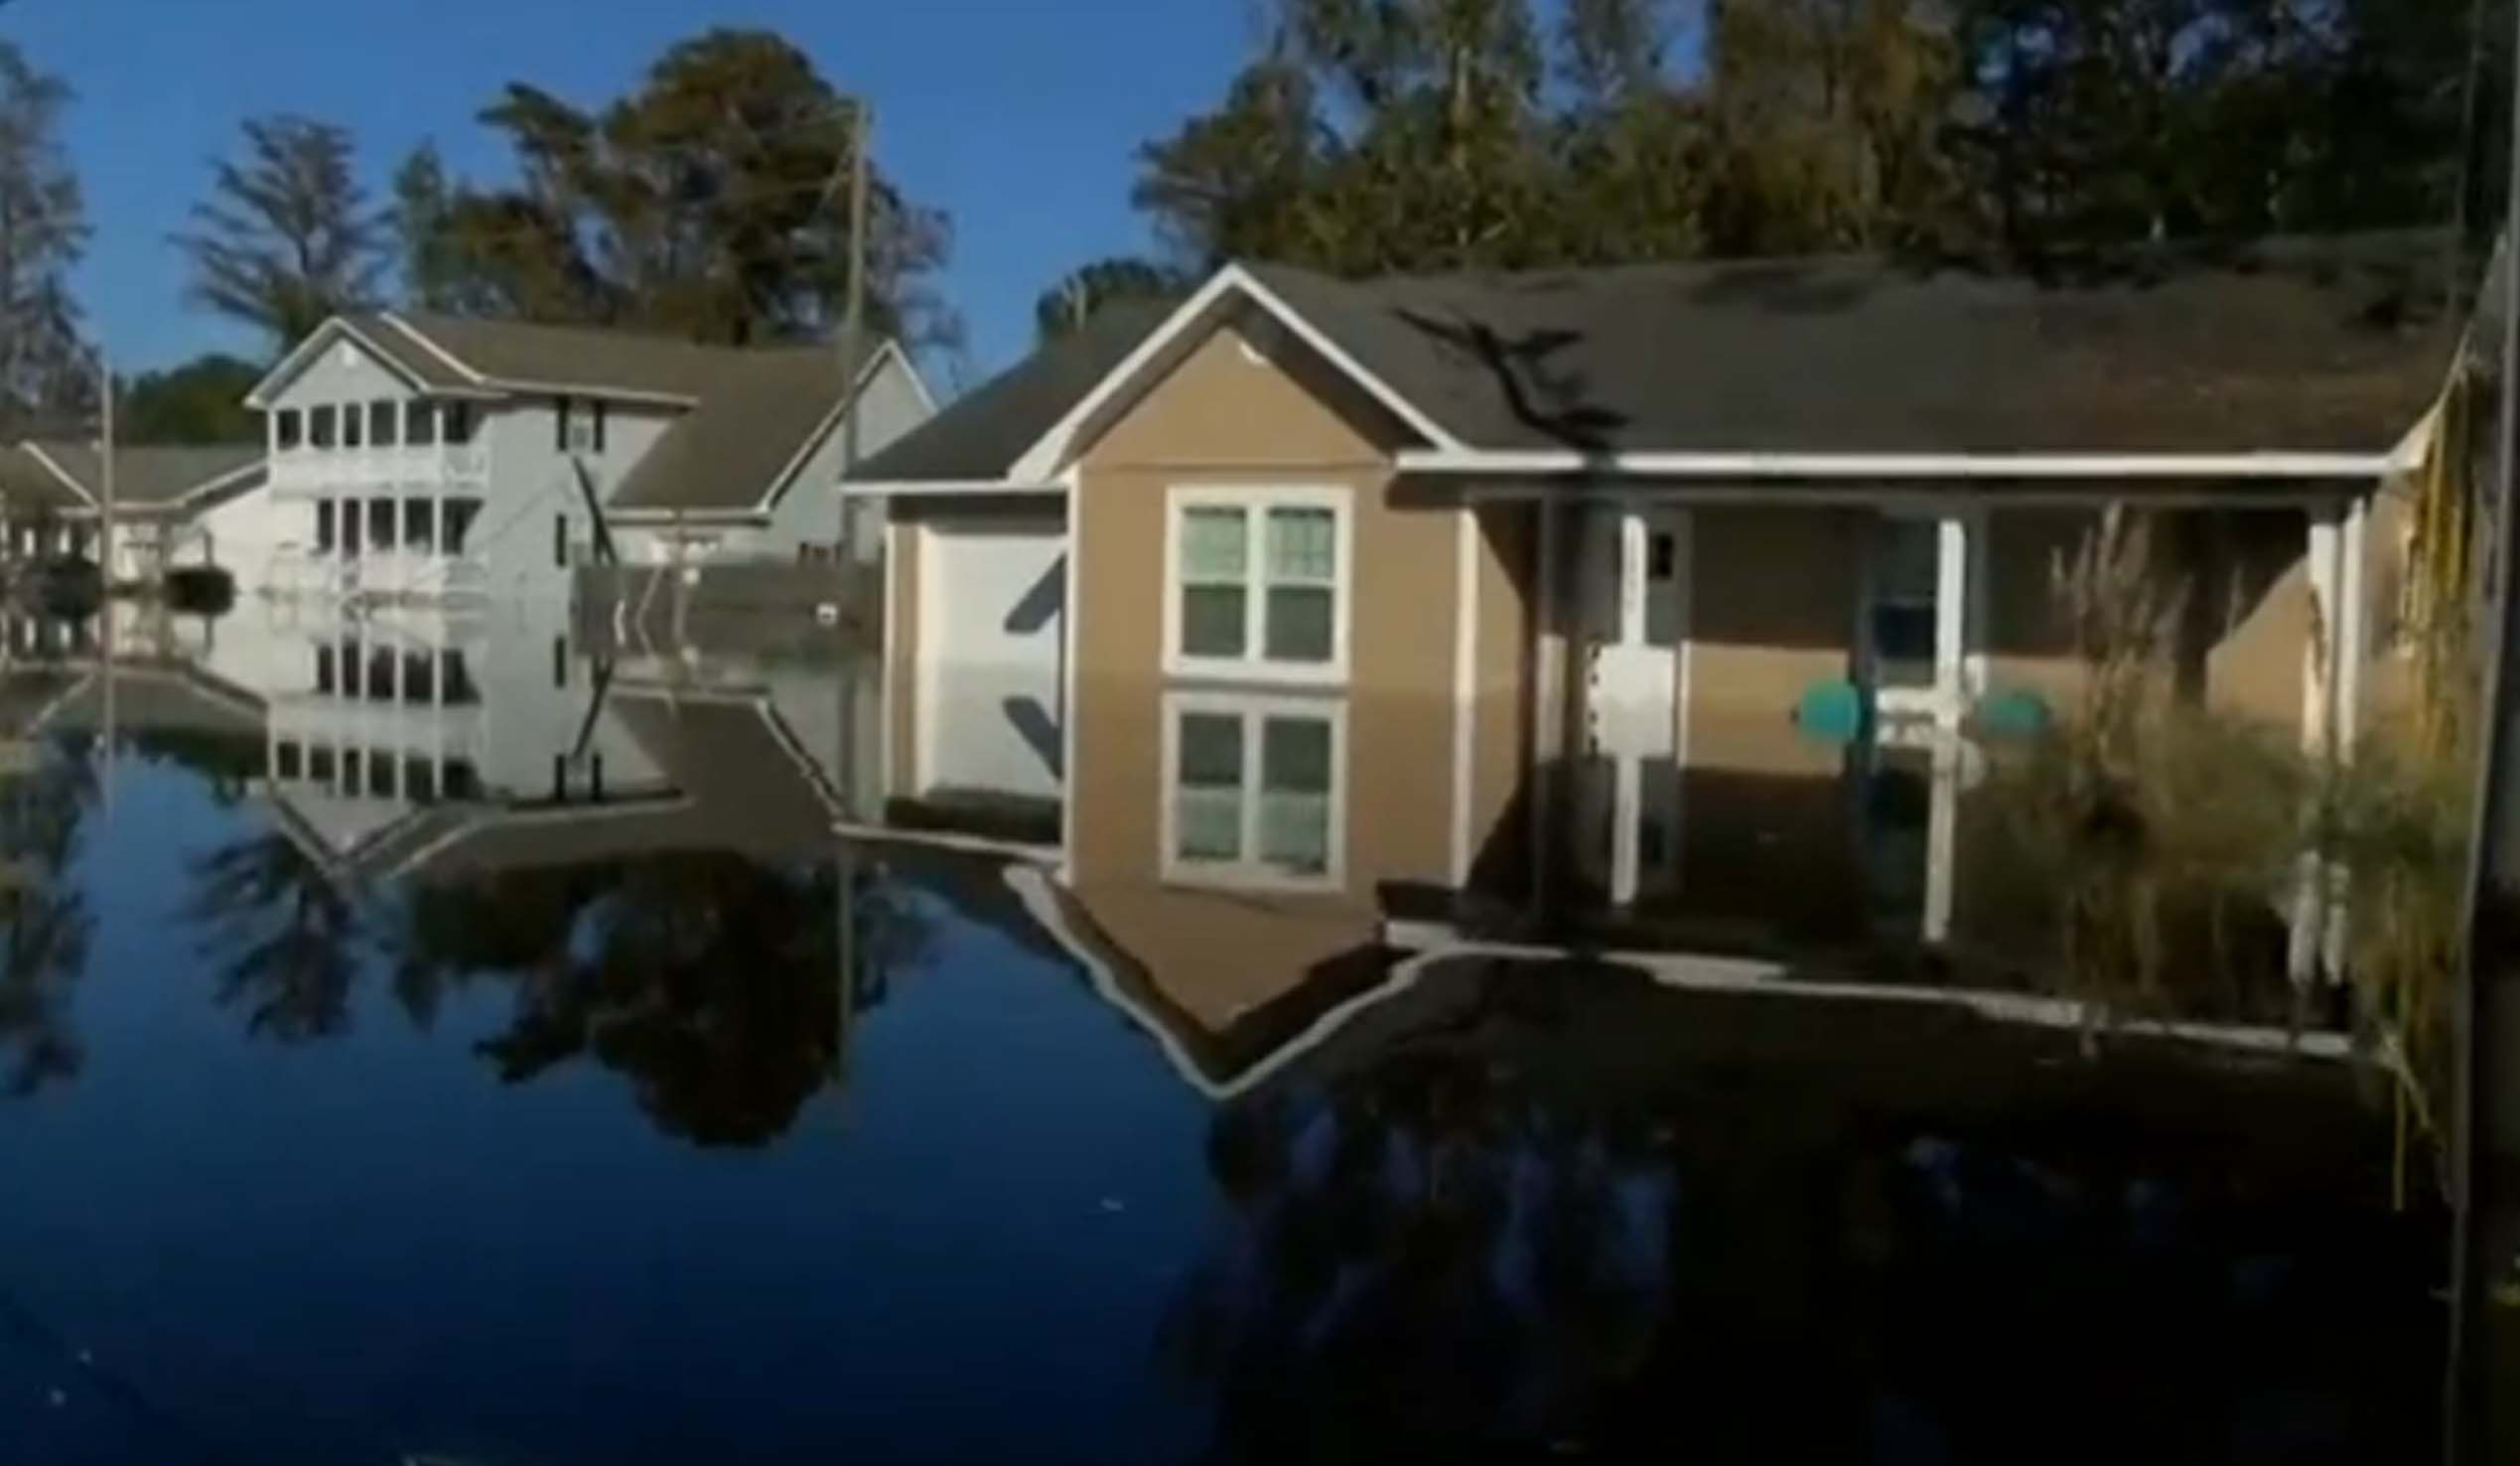 Parts of South Carolina remain flooded after deadly Hurricane Matthew hit the area over a week ago.